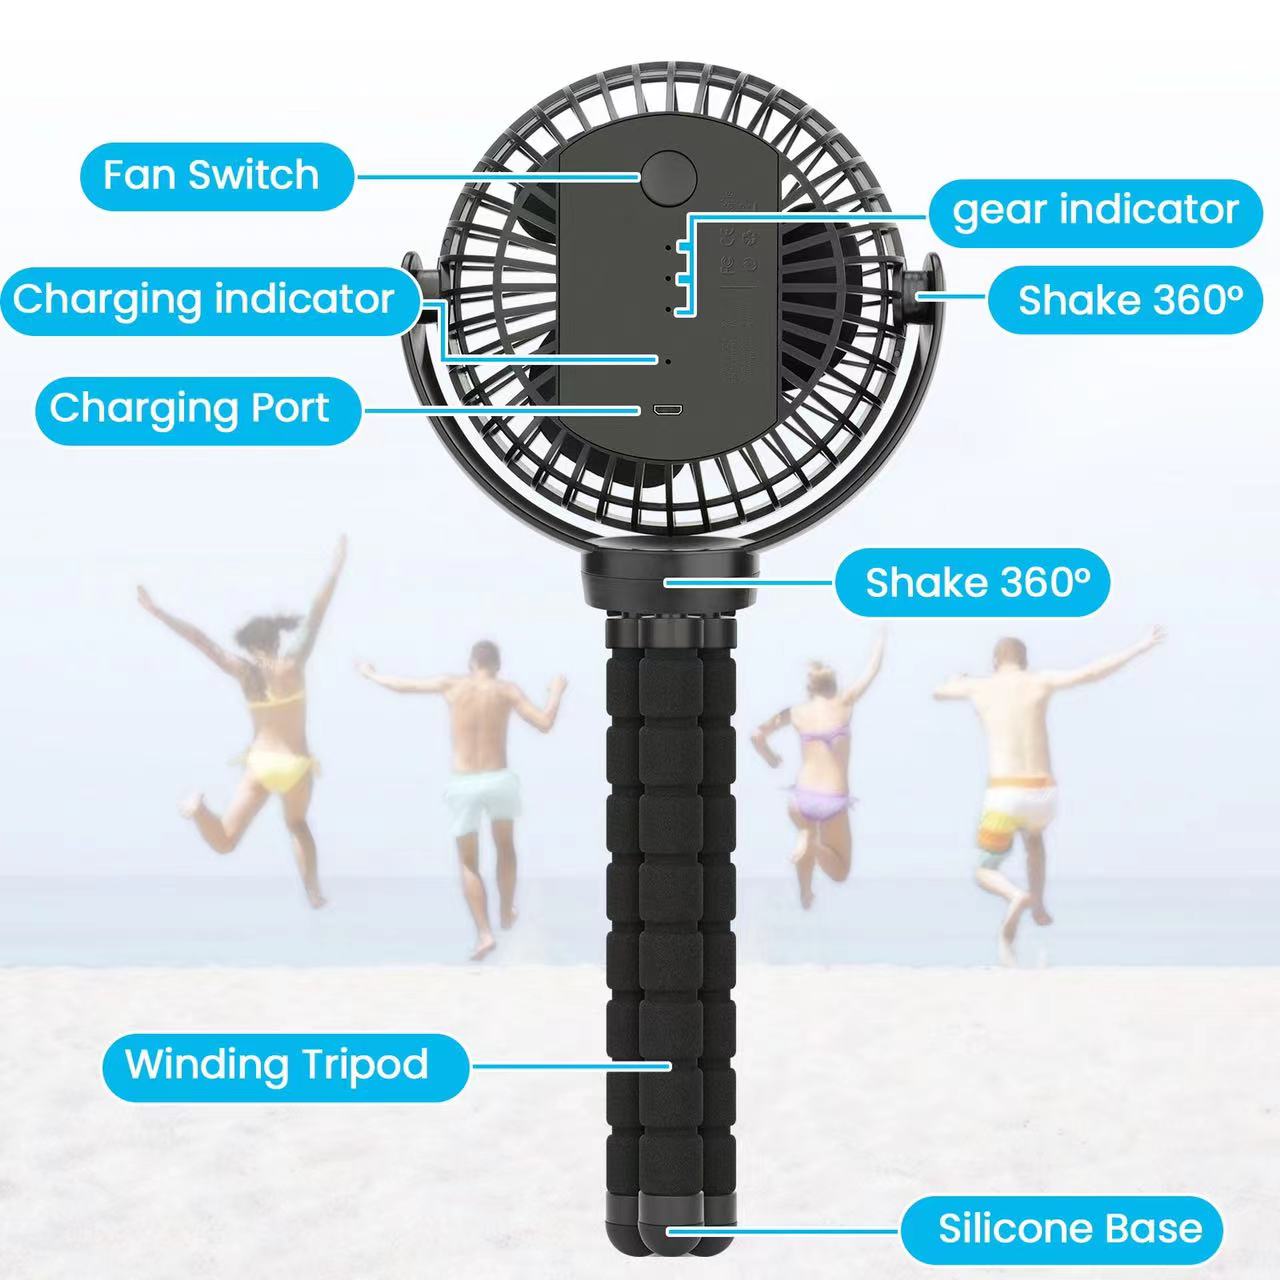 Portable Stroller Fan With Power Bank